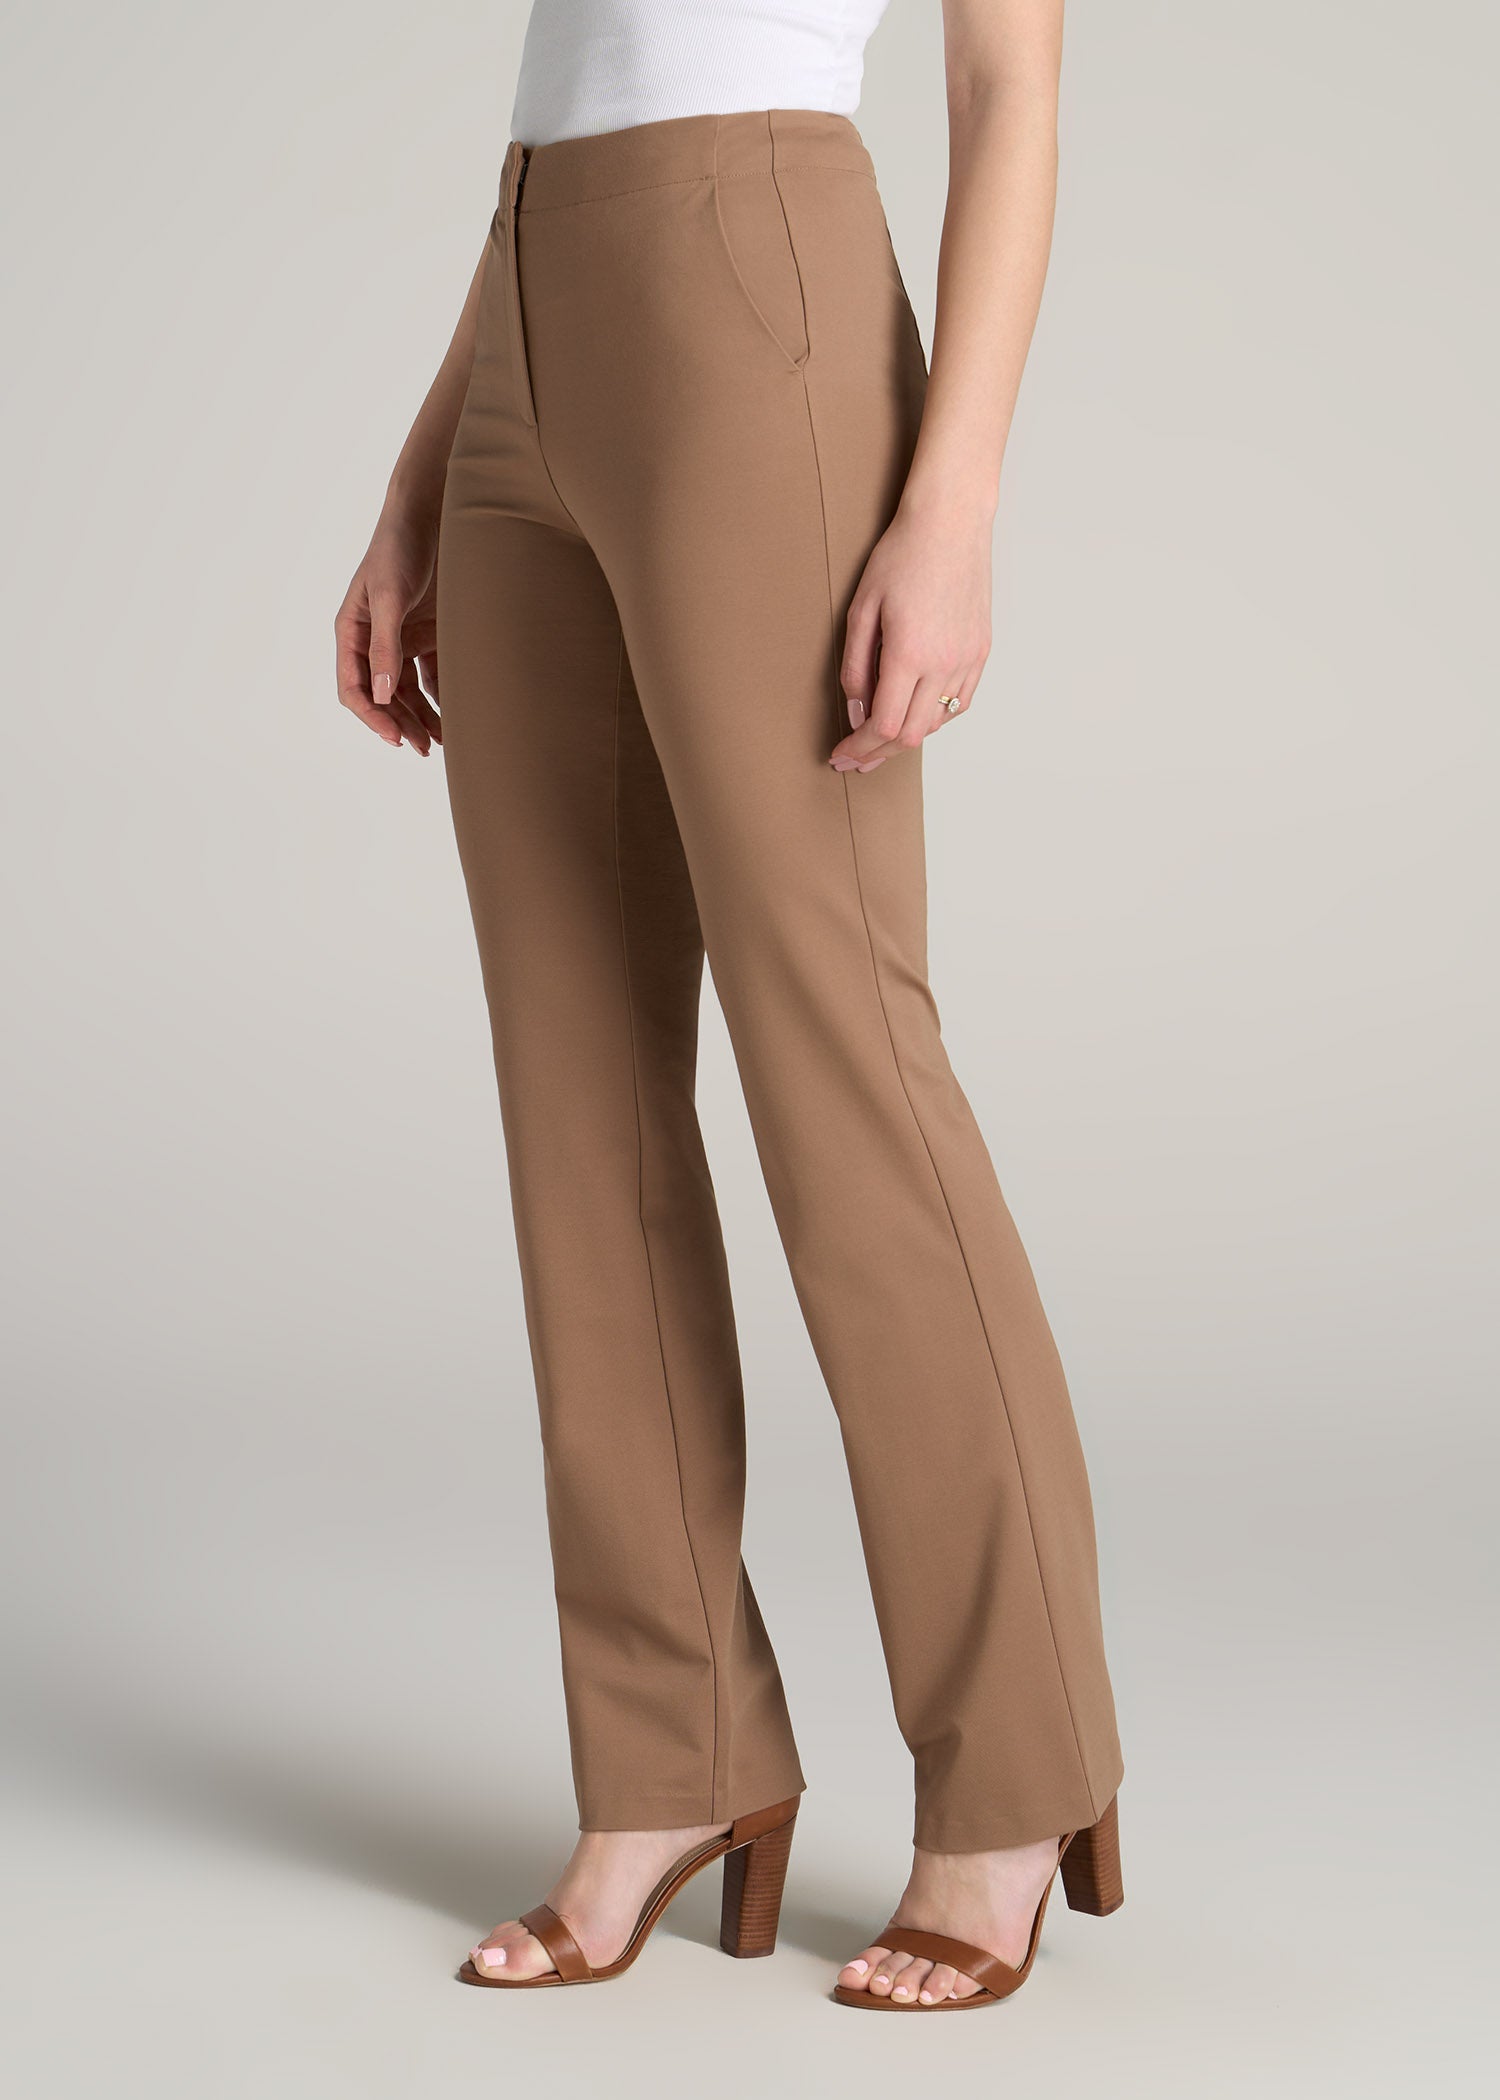 Pants for Tall Women